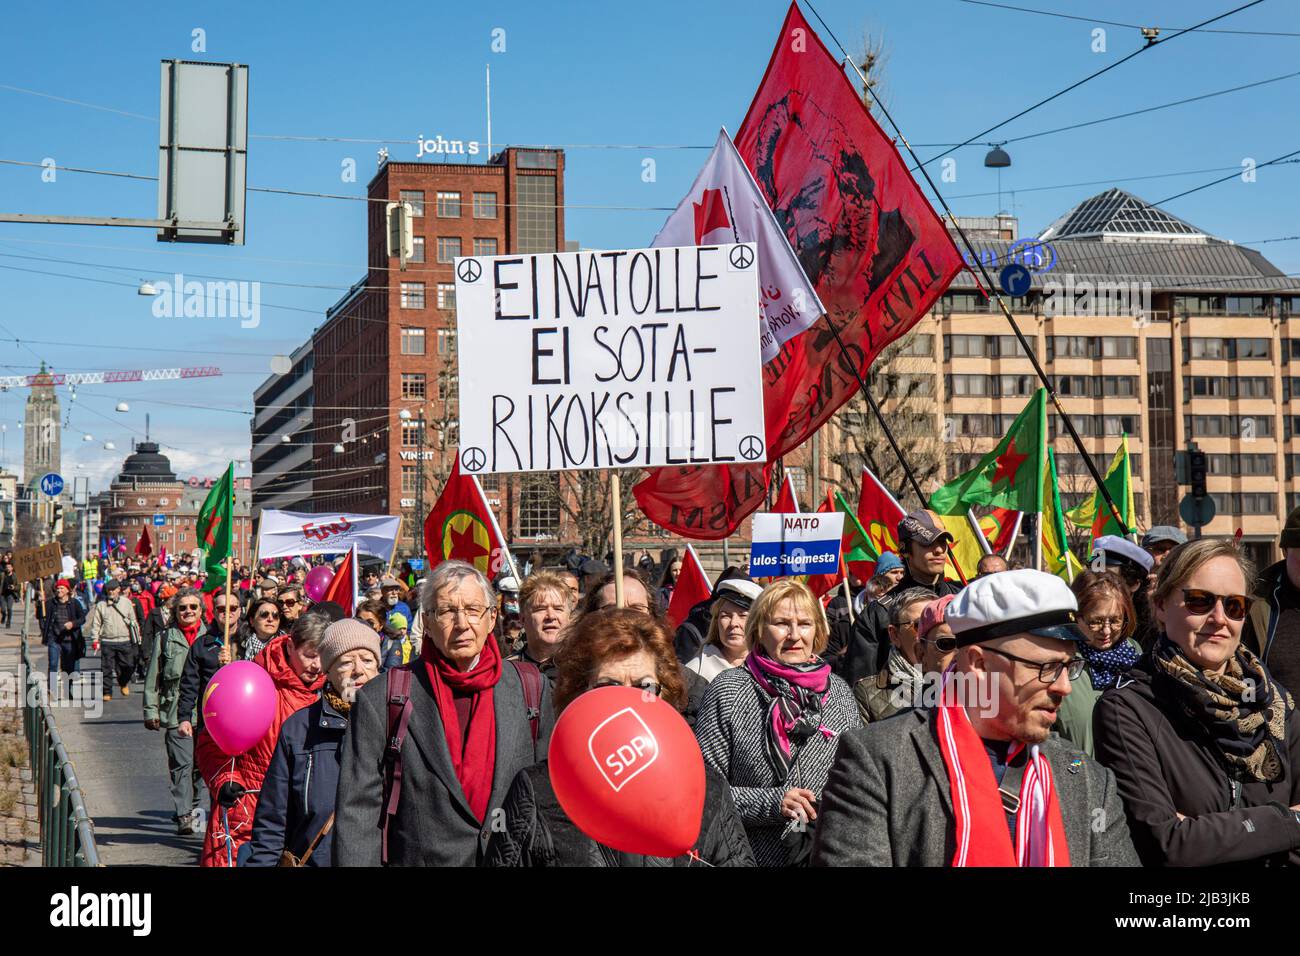 EI NATOLLE. Hand-written sign at socialist May Day parade on International Workers' Day in Helsinki, Finland. Stock Photo